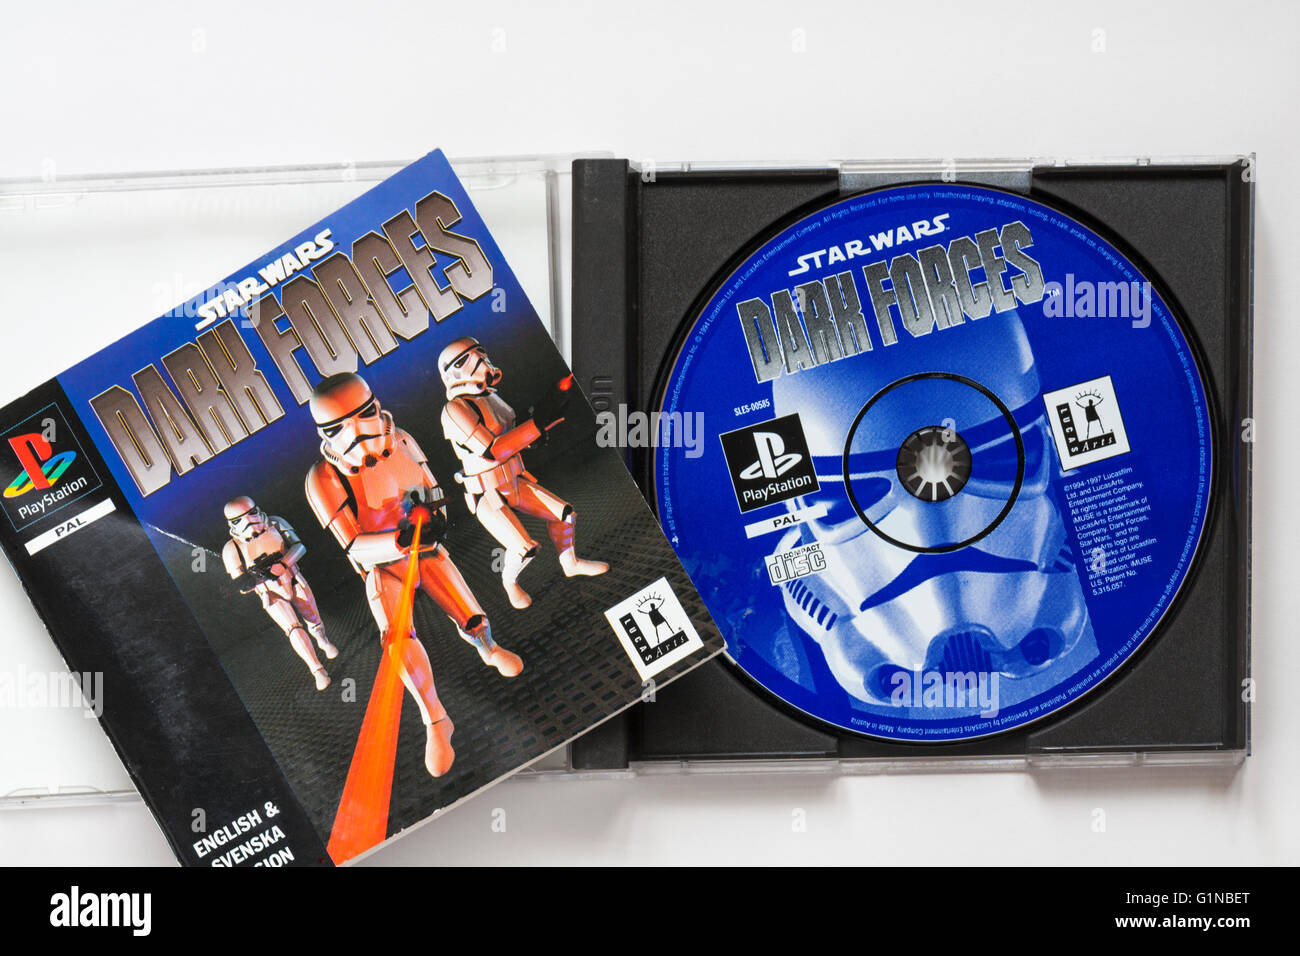 Star Wars Dark Forces Playstation game set on white background Stock Photo